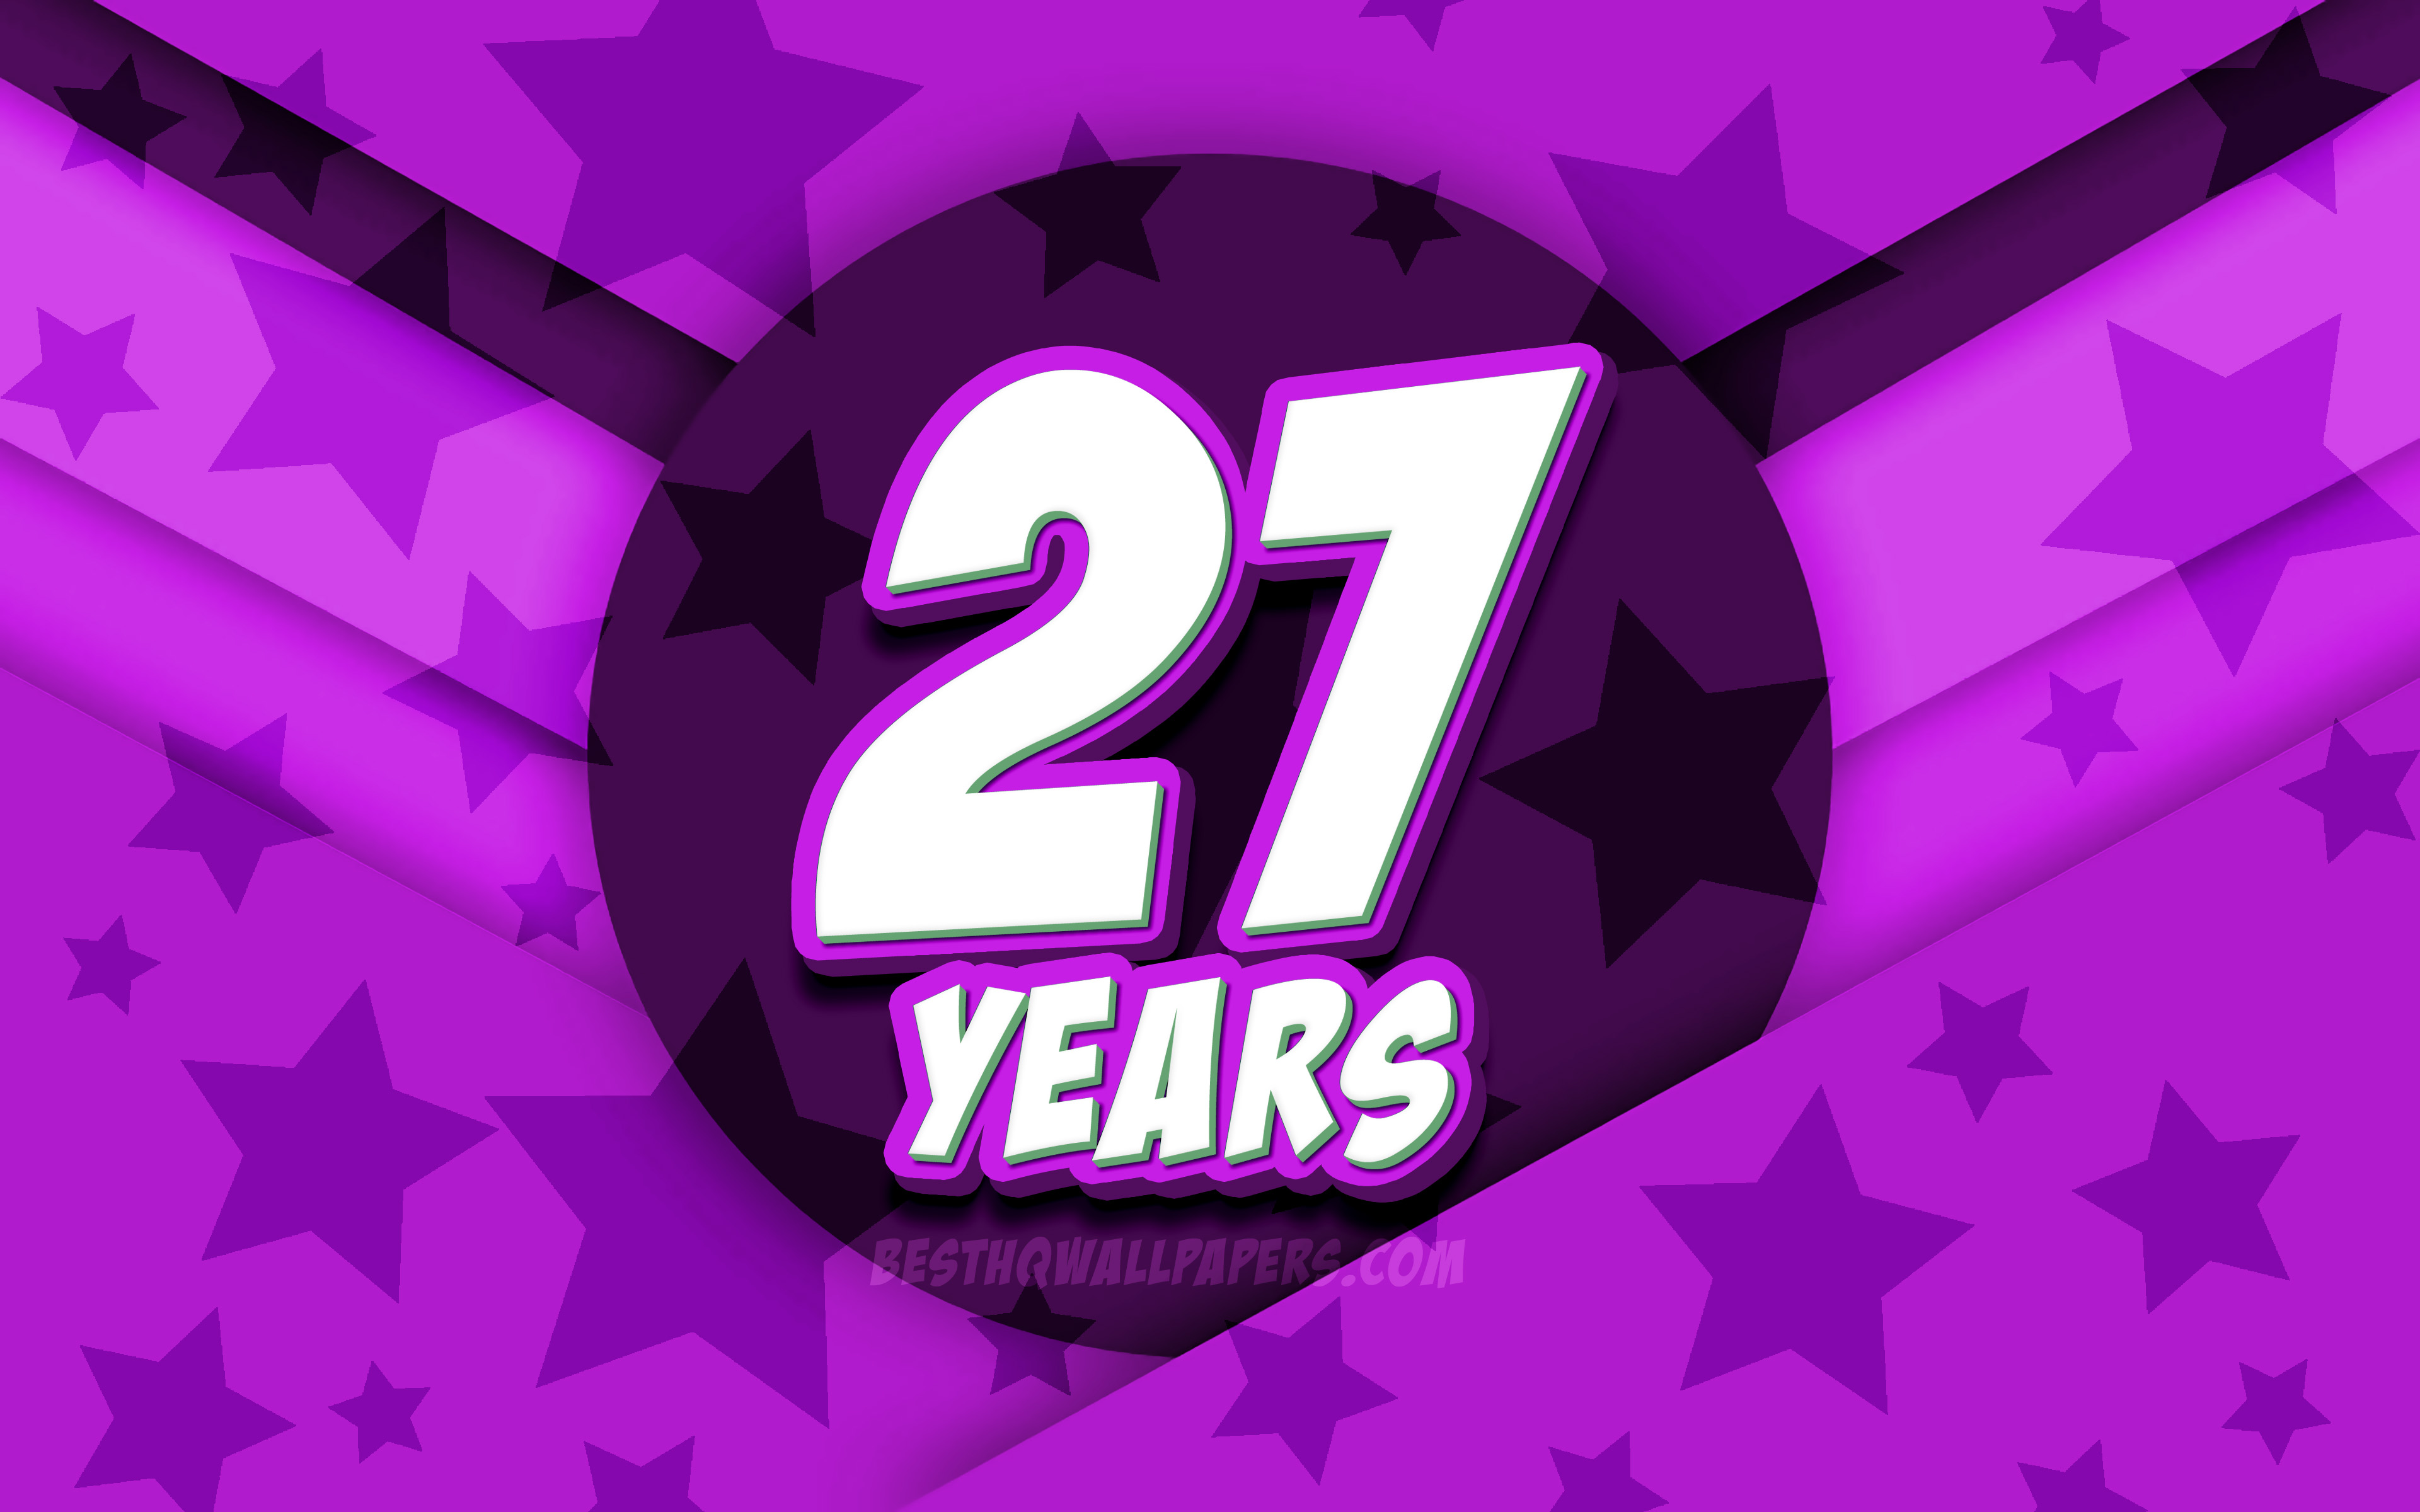 Download wallpaper 4k, Happy 27 Years Birthday, comic 3D letters, Birthday Party, purple stars background, Happy 27th birthday, 27th Birthday Party, artwork, Birthday concept, 27th Birthday for desktop with resolution 3840x2400. High